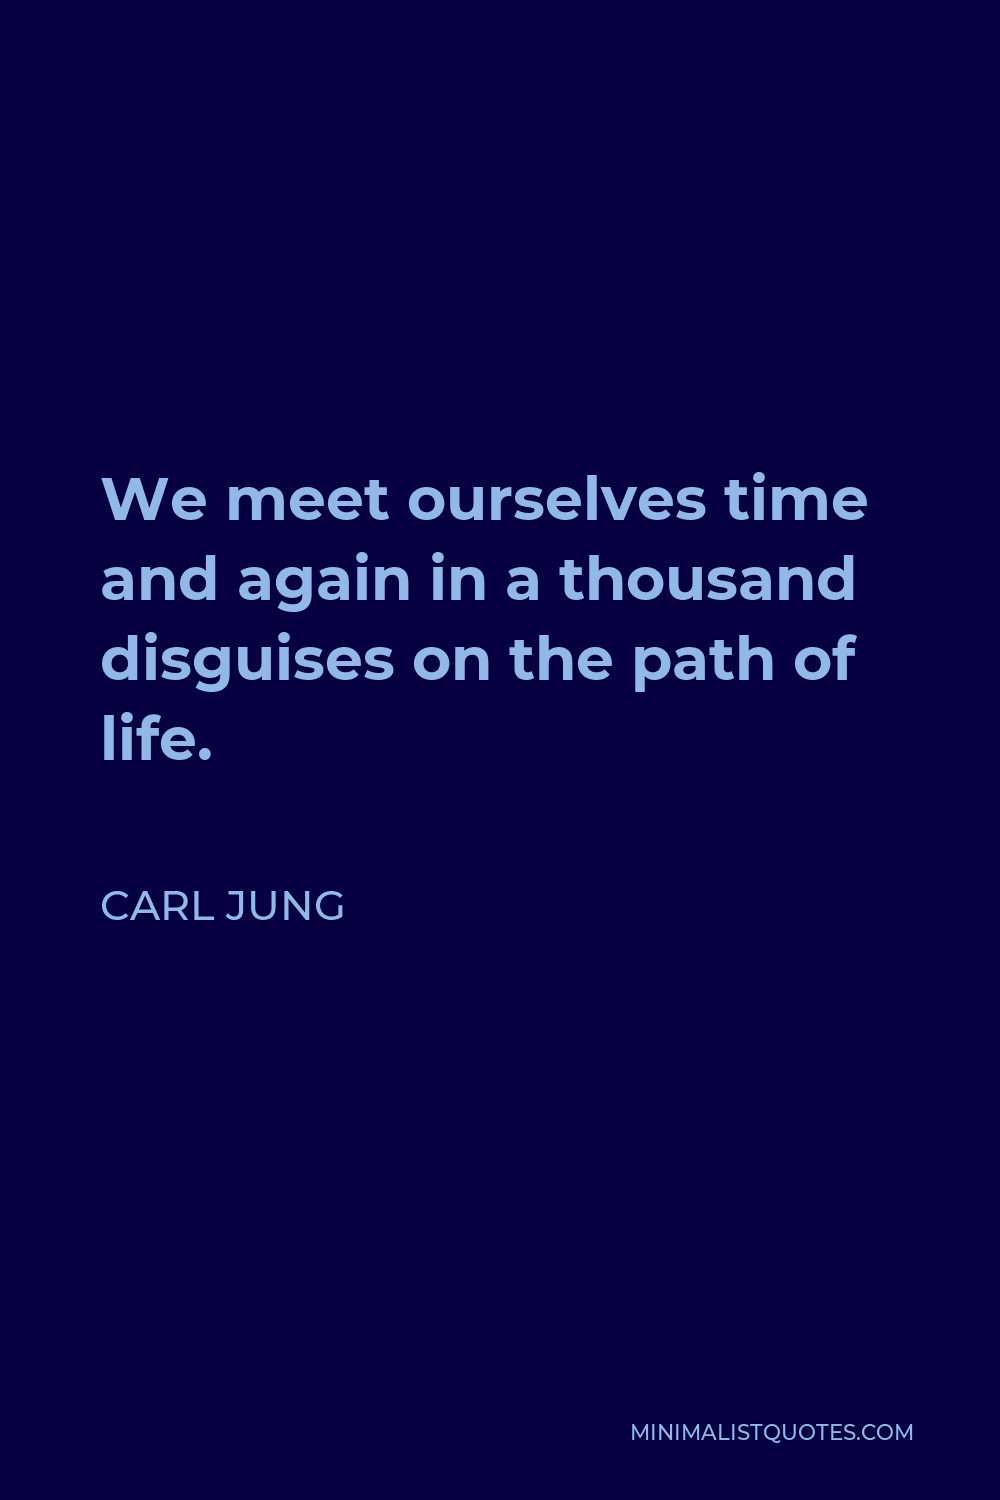 Carl Jung Quote - We meet ourselves time and again in a thousand disguises on the path of life.